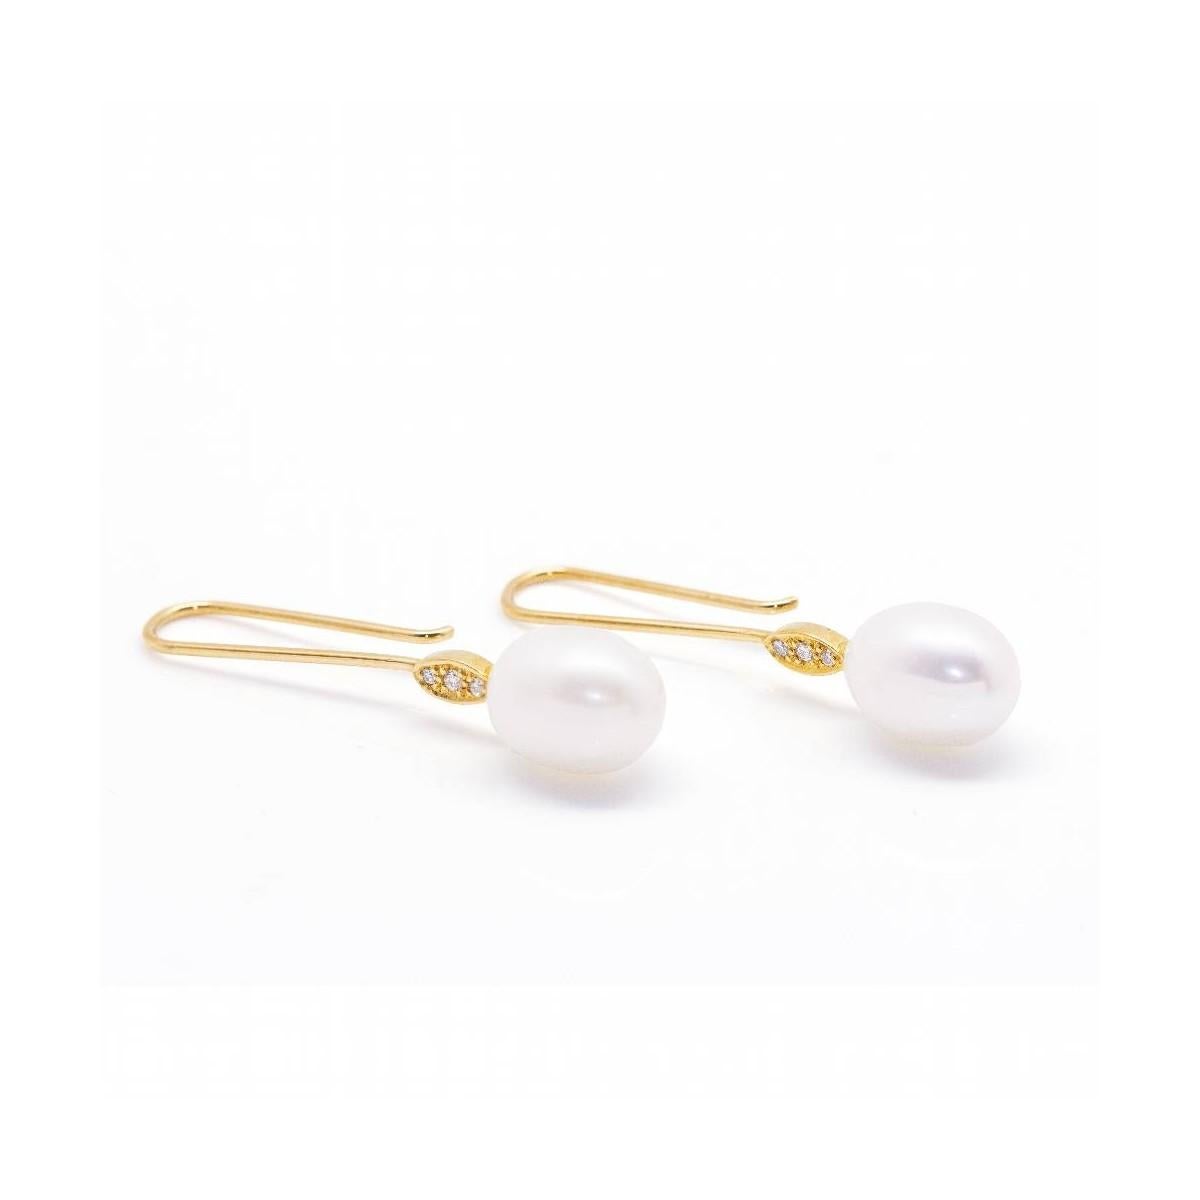 Yellow Gold and Pearl Earrings for women  6x Brilliant cut Diamonds with total weight 0.06cts., G/Vs quality and 2x 12.5mm oval pearls  Without closure  18 kt Yellow Gold.  6.40 grams.  Measurements: 4cm long  Brand new product  Ref: D360904FV